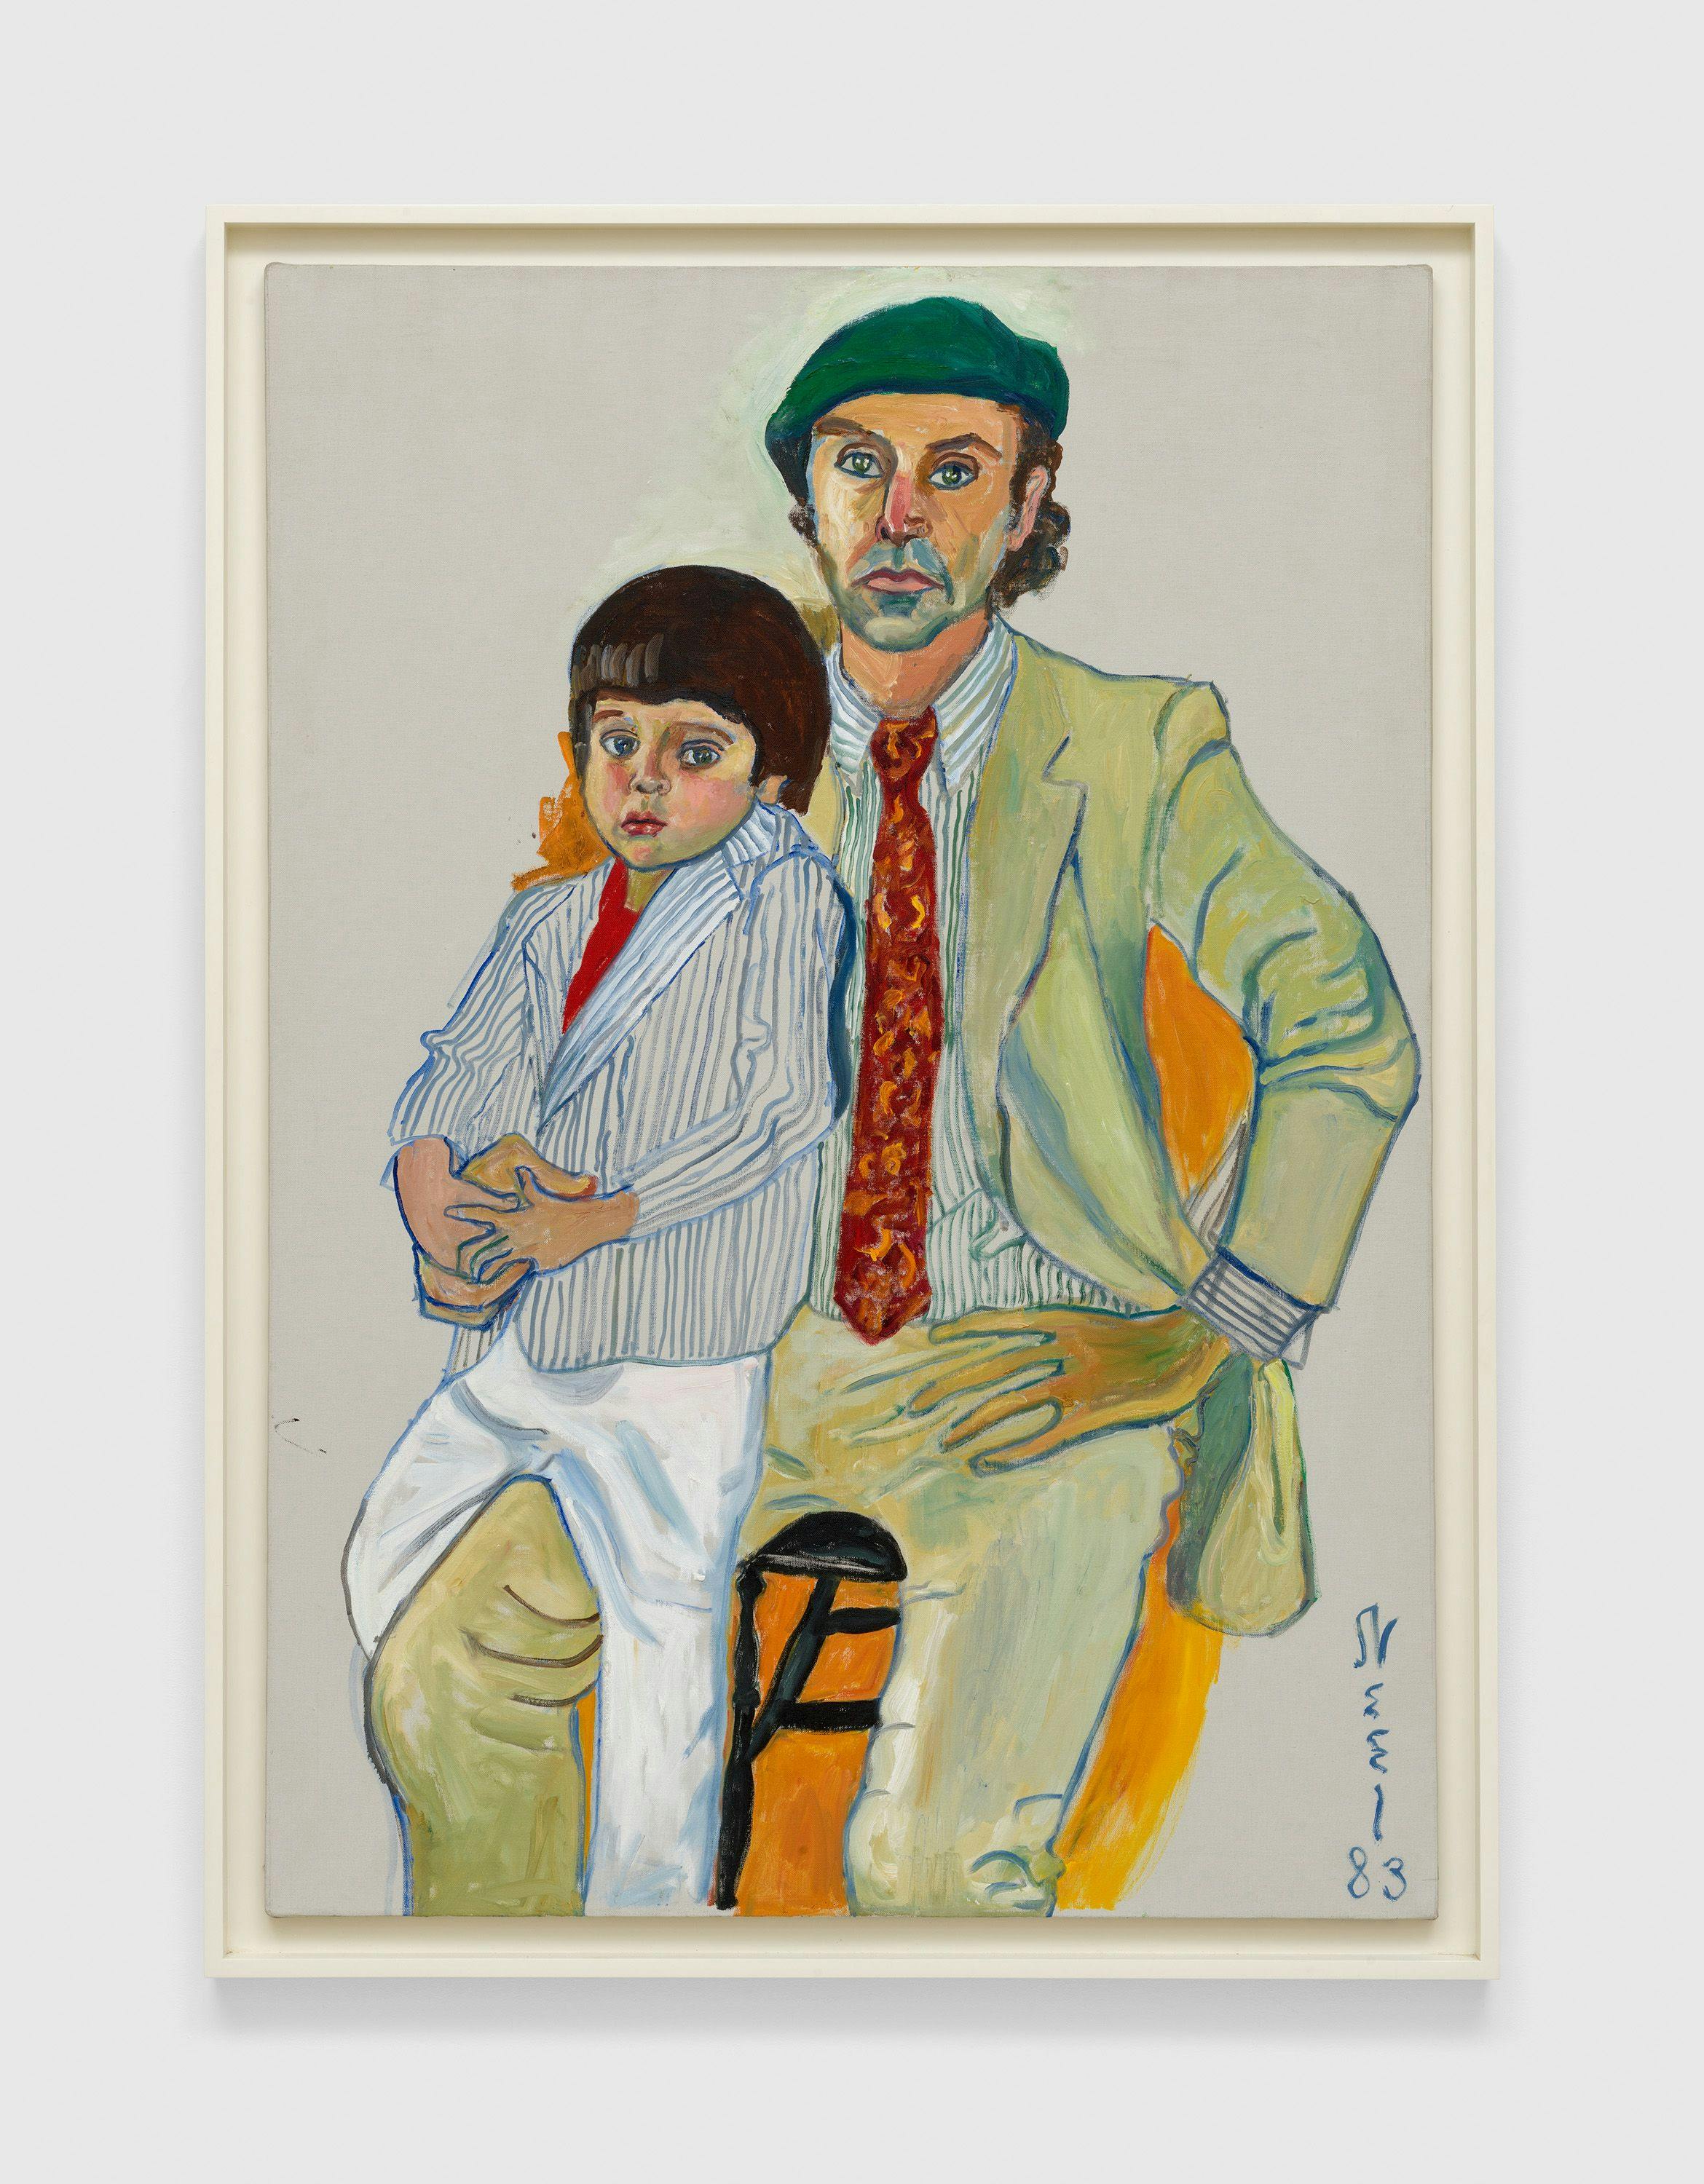 A painting by Alice Neel, Hartley and Andrew, dated 1983.